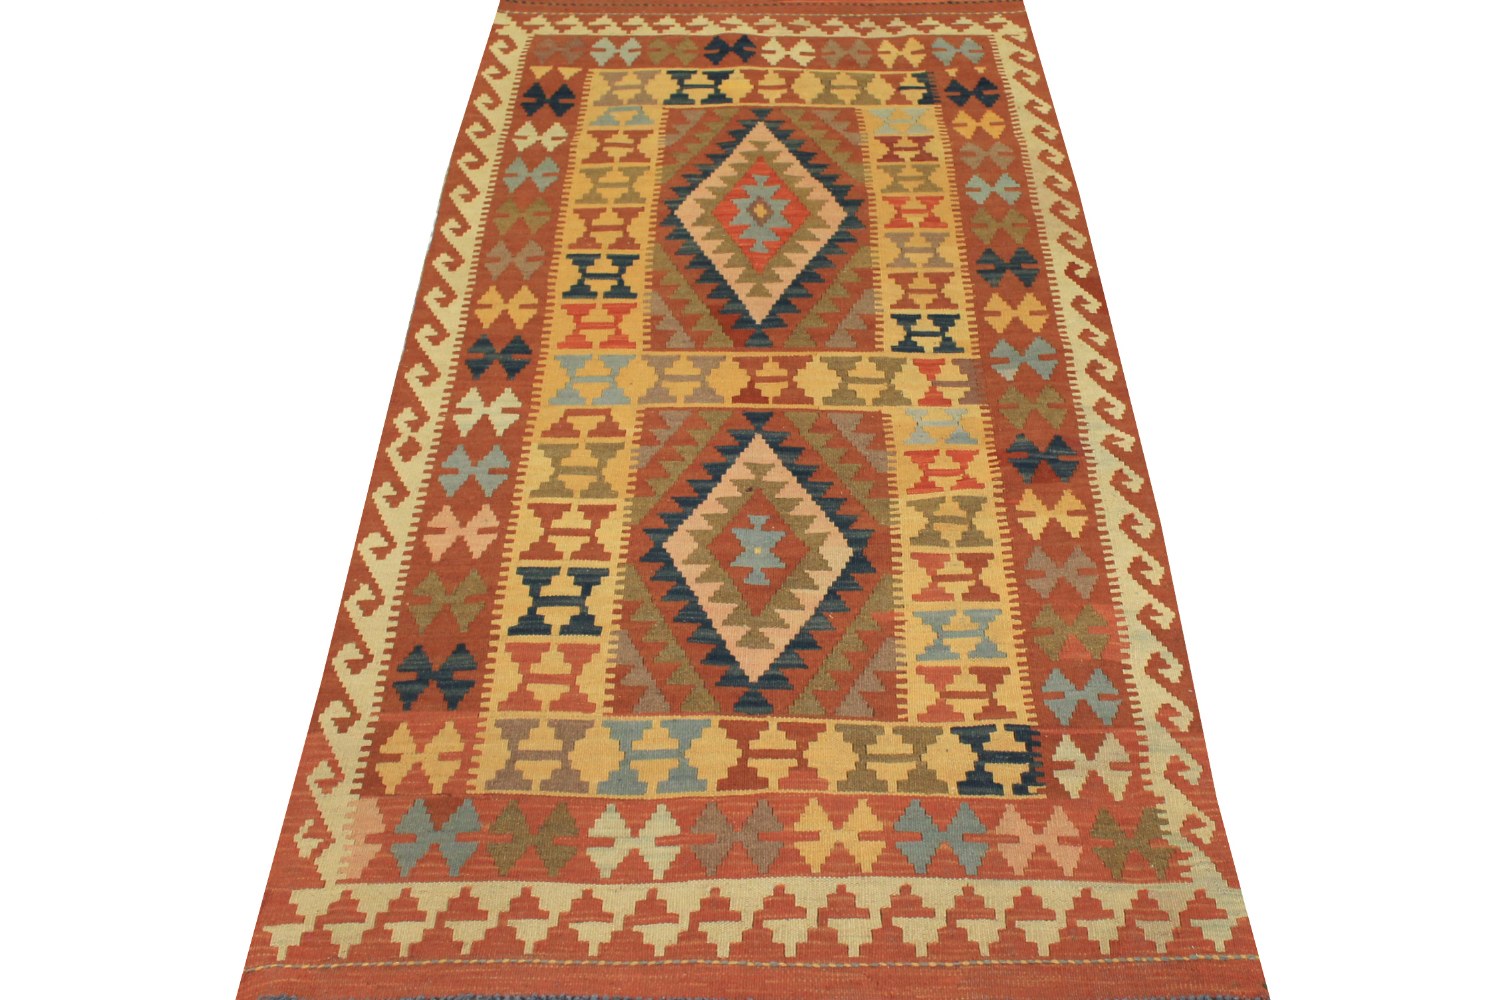 4x6 Flat Weave Hand Knotted Wool Area Rug - MR13329